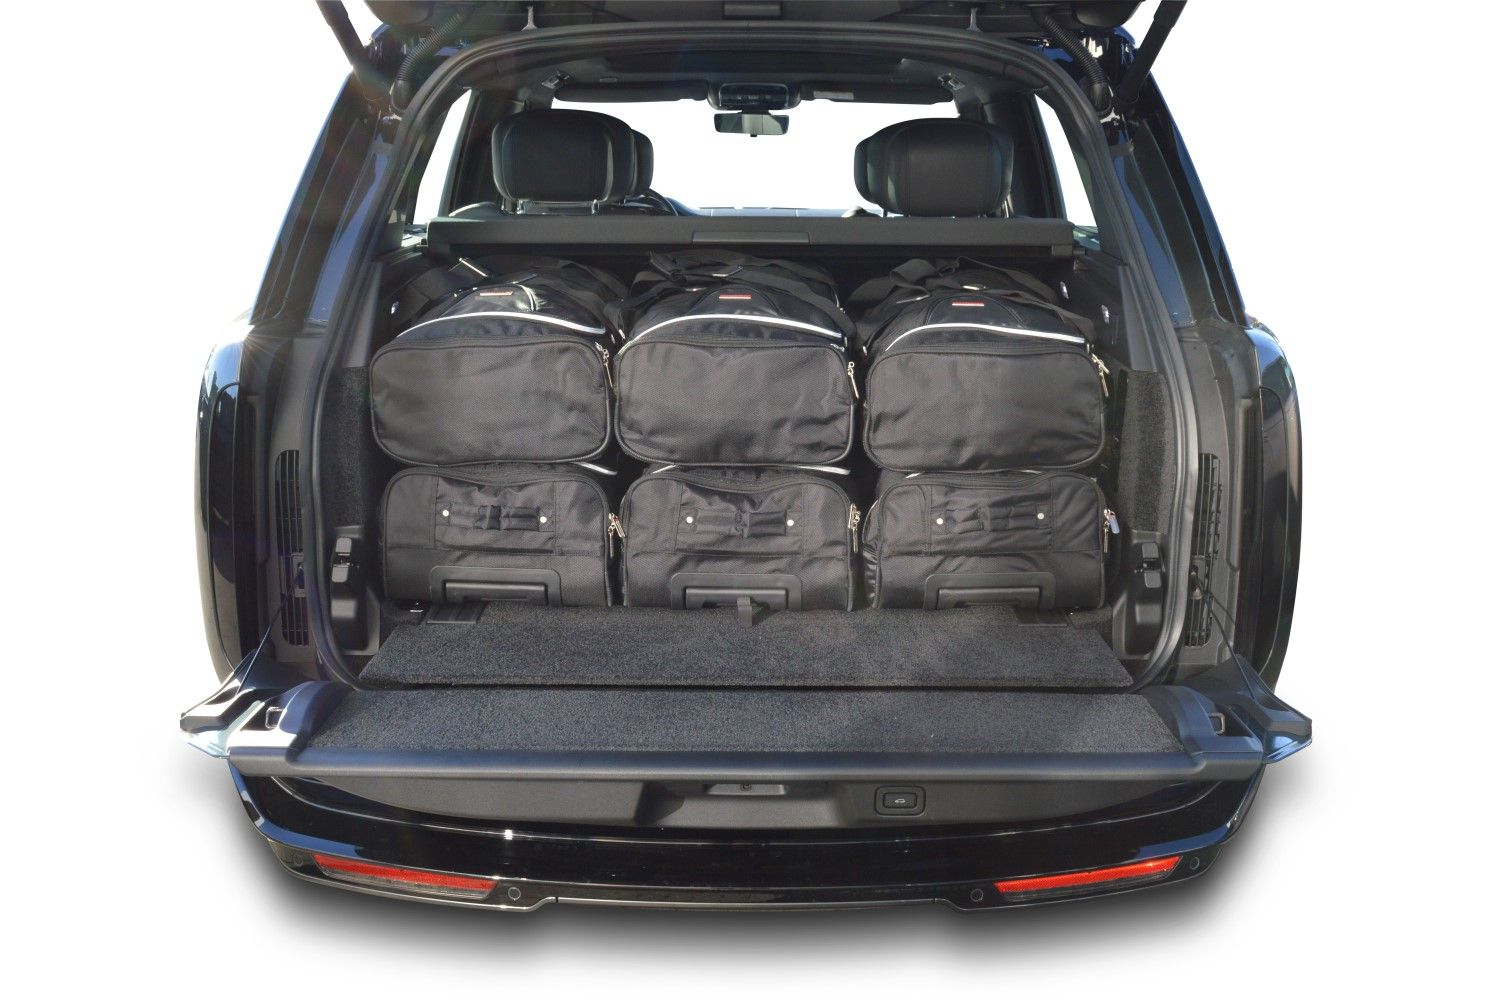 Travel bags fits Range Time Rover Rover 379 | for Shop tailor saving fit | Perfect pcs) and space Land | V Bags Covers covers for Car made $ (L460) (6 car